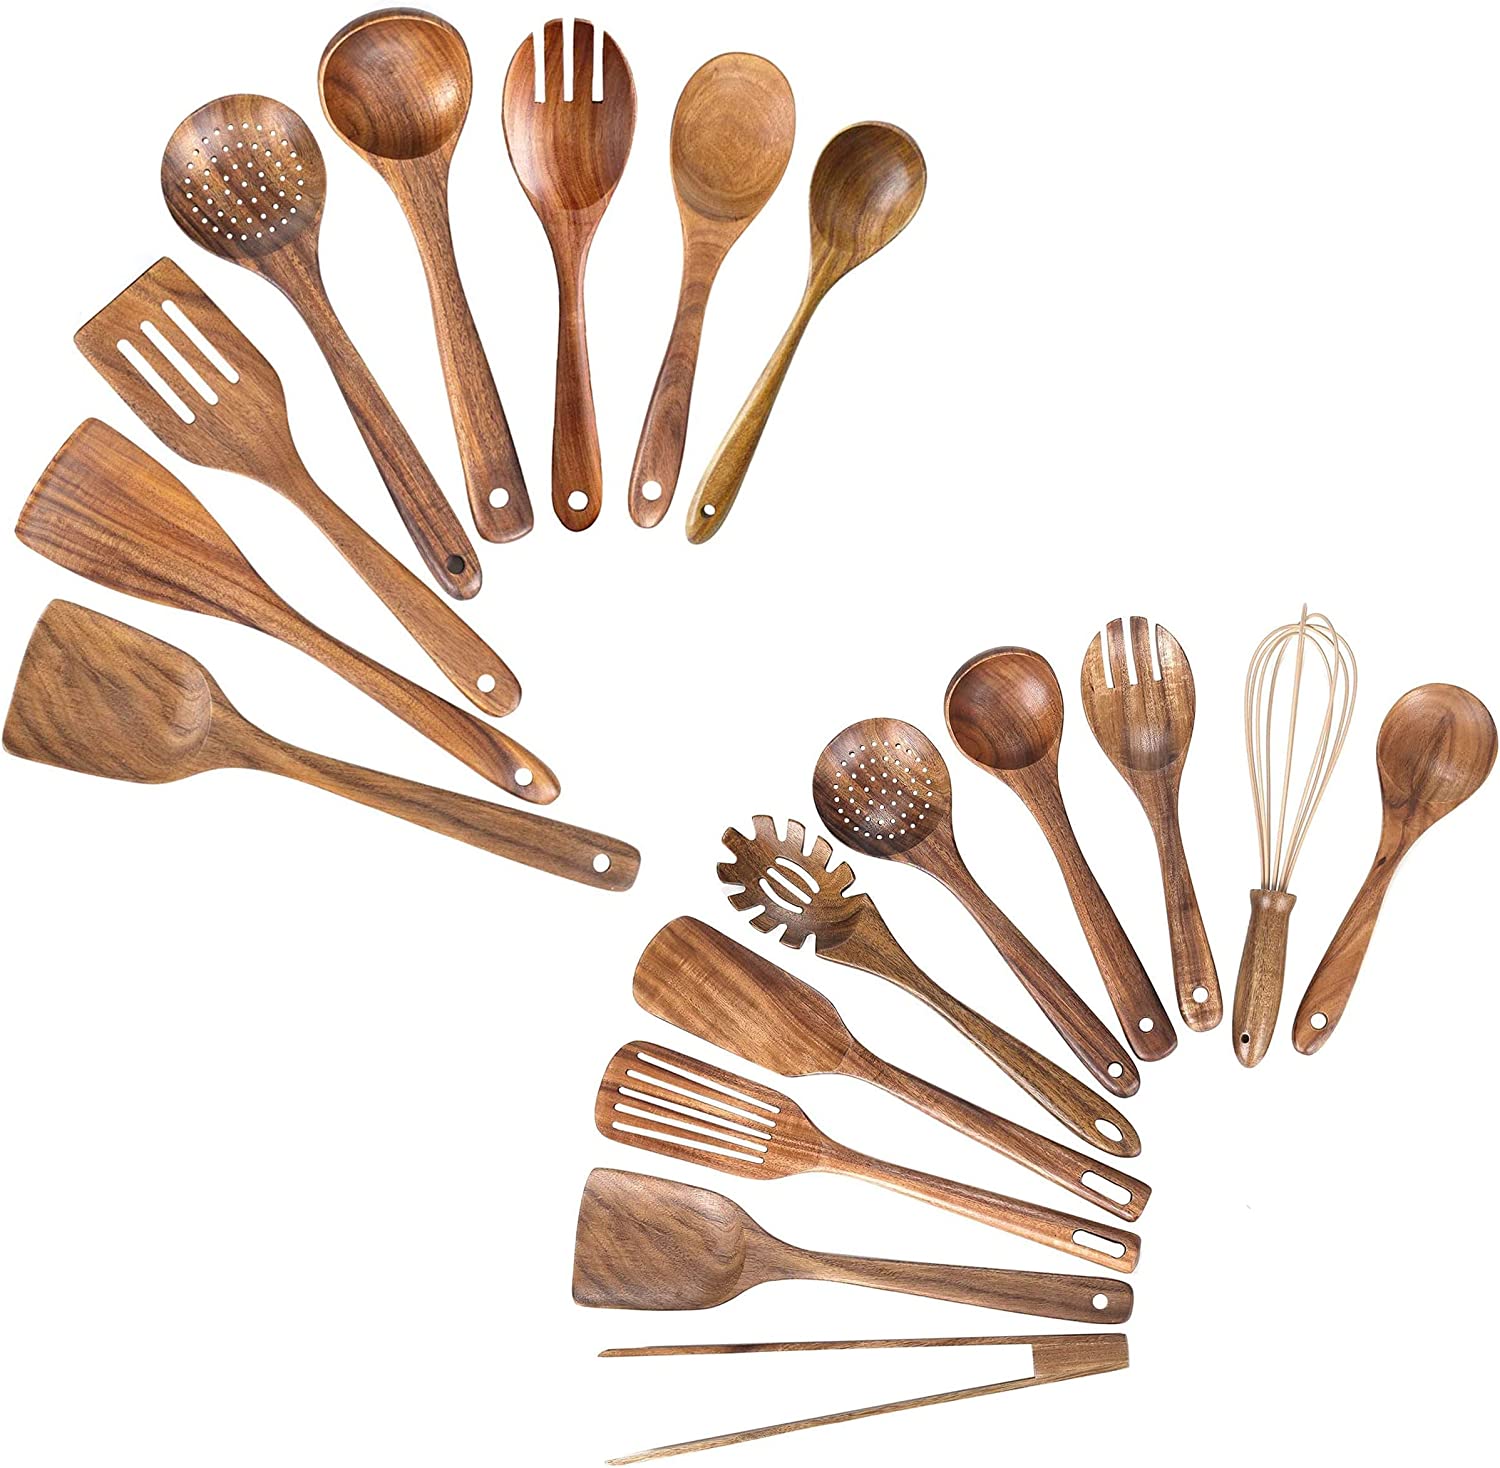 18 Pack Wooden Spoons Wood Kitchen Utensil Set for Cooking Nonstick Kitchen